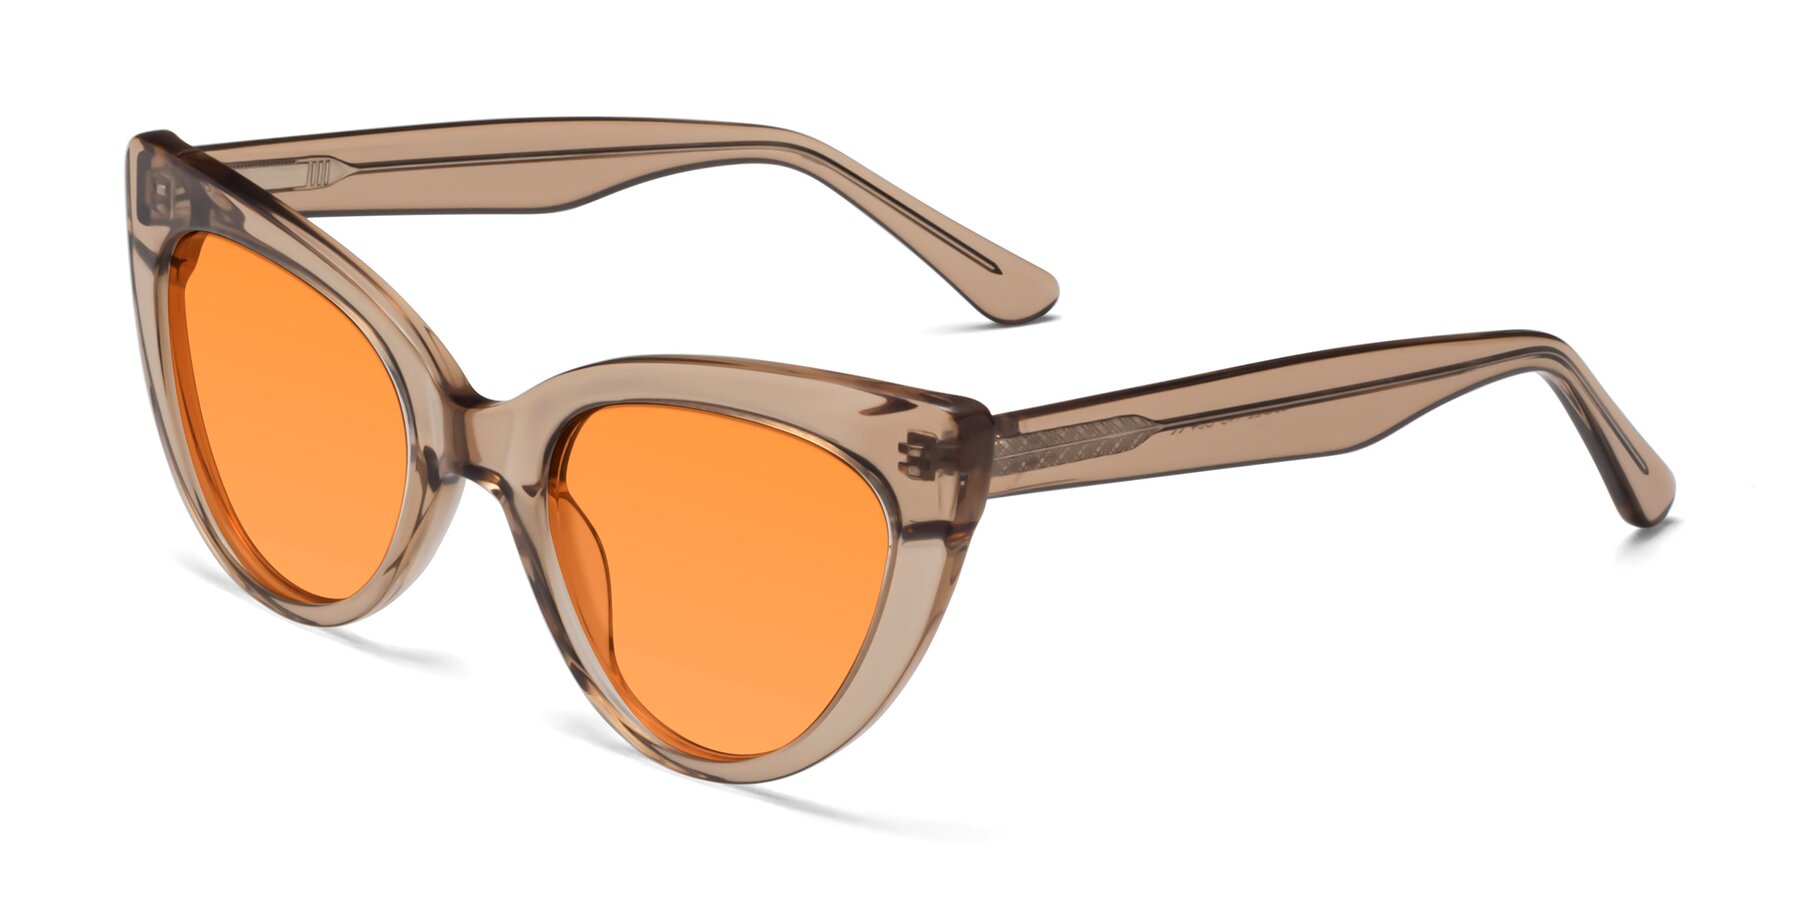 Angle of Tiesi in Caramel with Orange Tinted Lenses